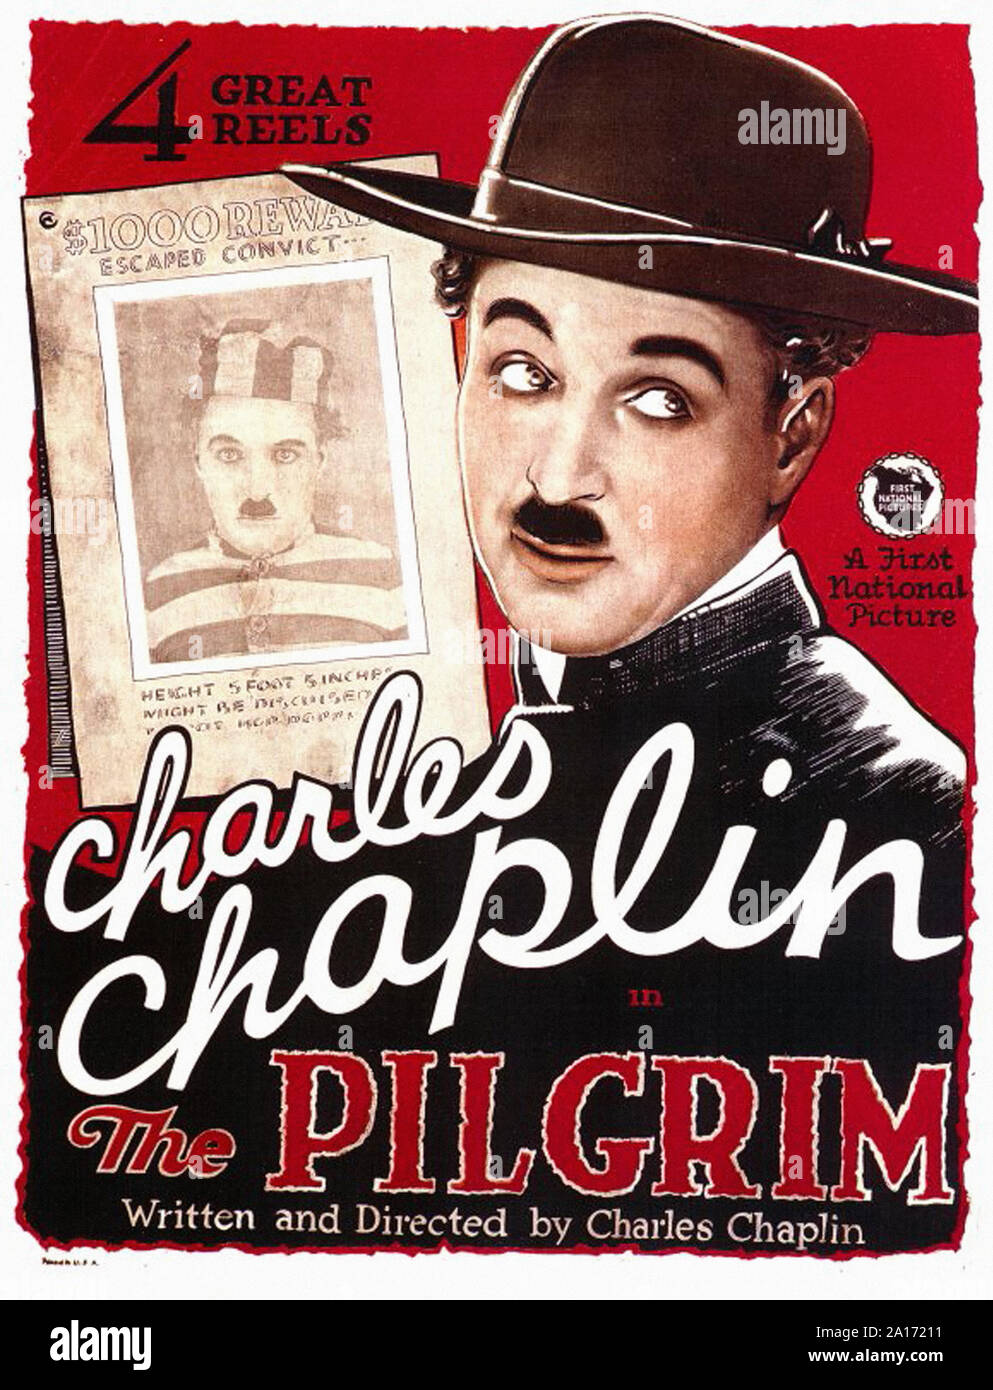 Laminated Sir Charles Spencer Charlie Chaplin Movie Film Actor Postal Stamp  Poster Dry Erase Sign 12x18 - Poster Foundry